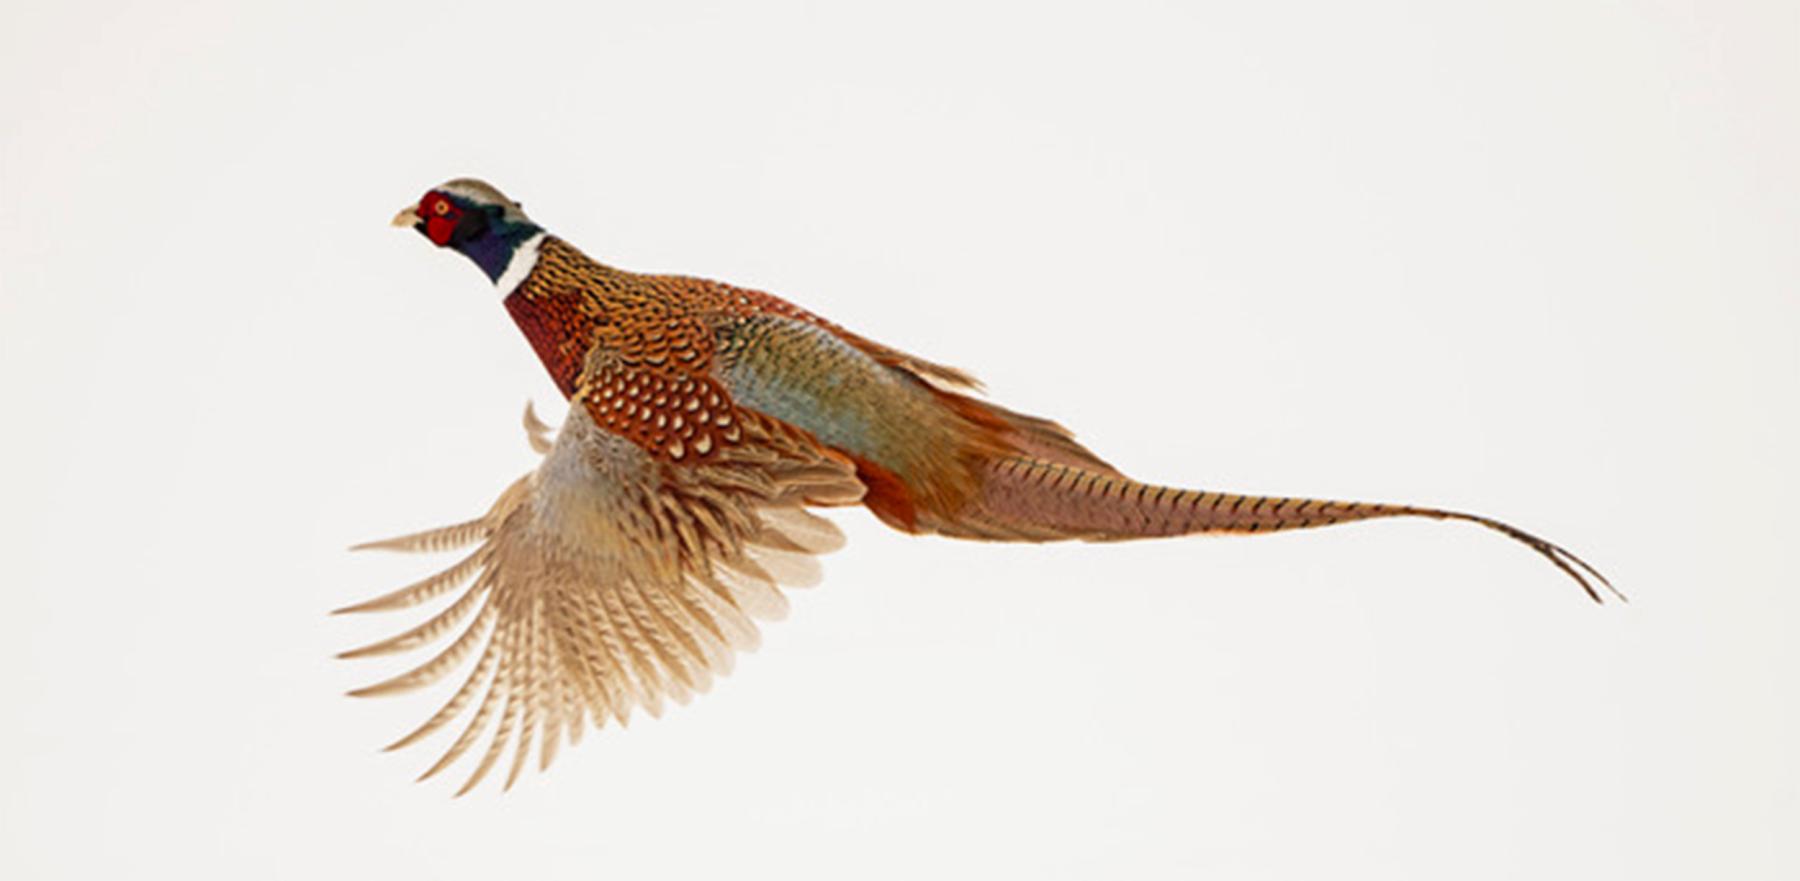 Ring-necked pheasants, popular game birds, were introduced in the United States from Asia in the 1880s. They first showed up in the Bates Hole Christmas count in 1984 and and have become more common since 2005. This male flies near Powell, Wyoming. Rob Koelling photo.